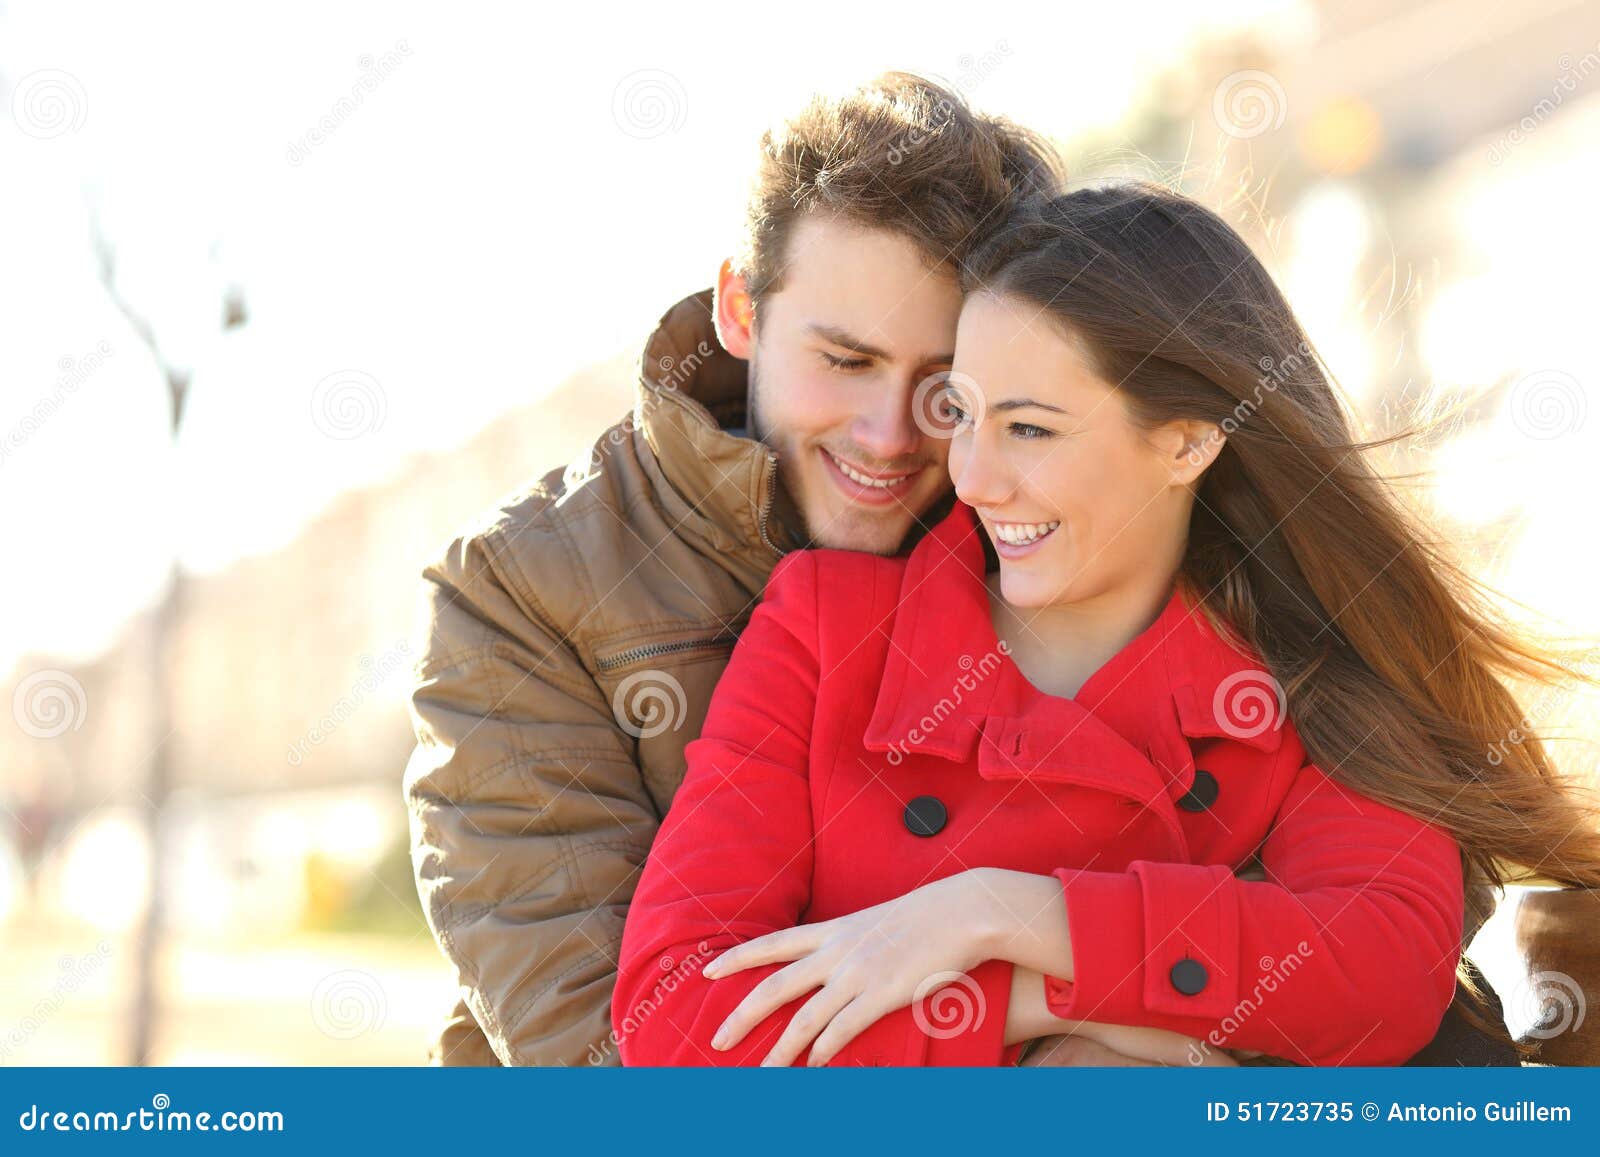 couple dating and hugging in love in a park